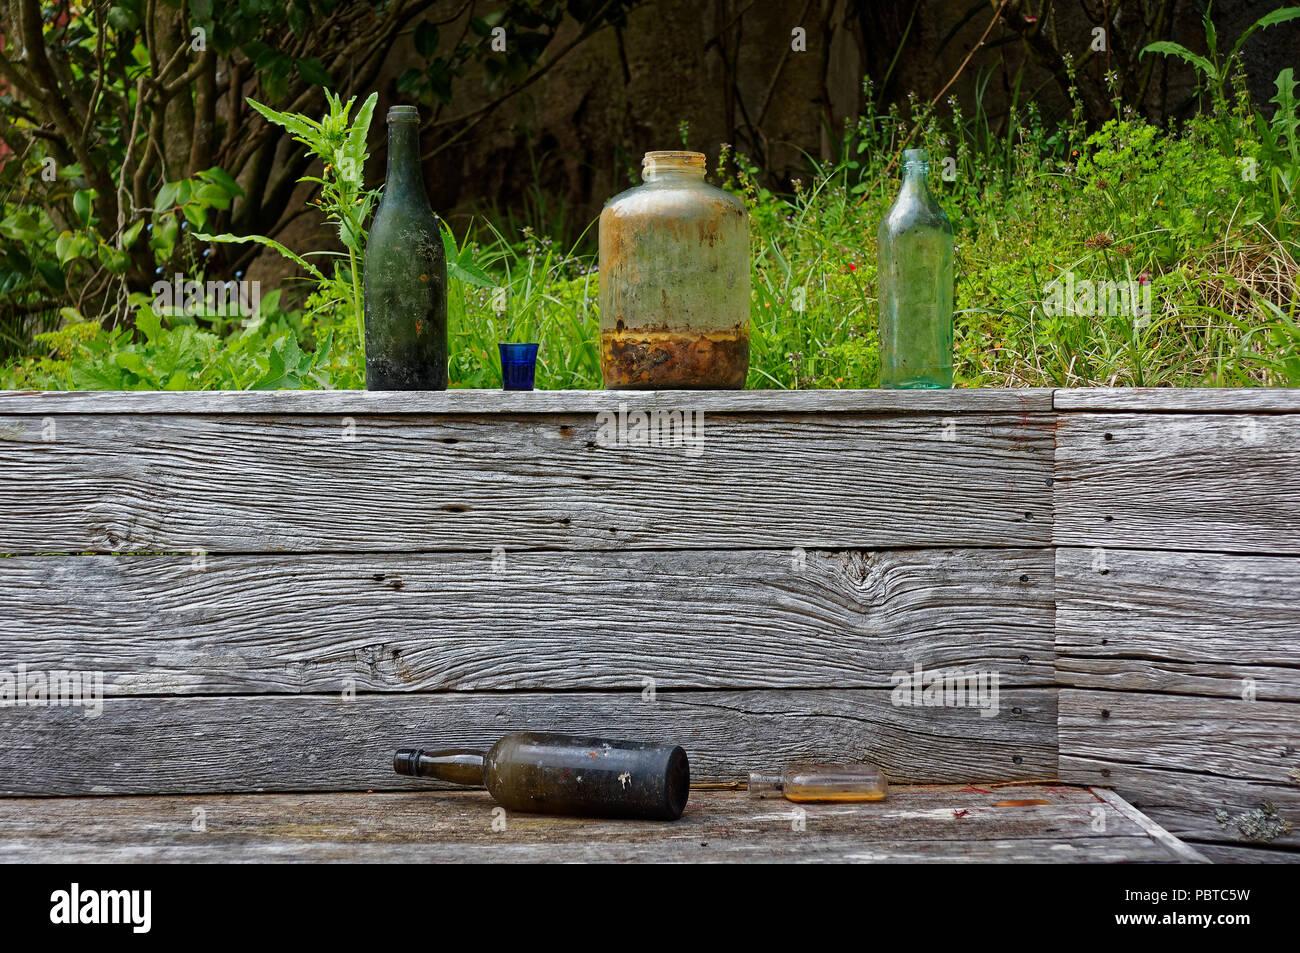 Old bottles and jars discarded on a wooden garden fence Stock Photo